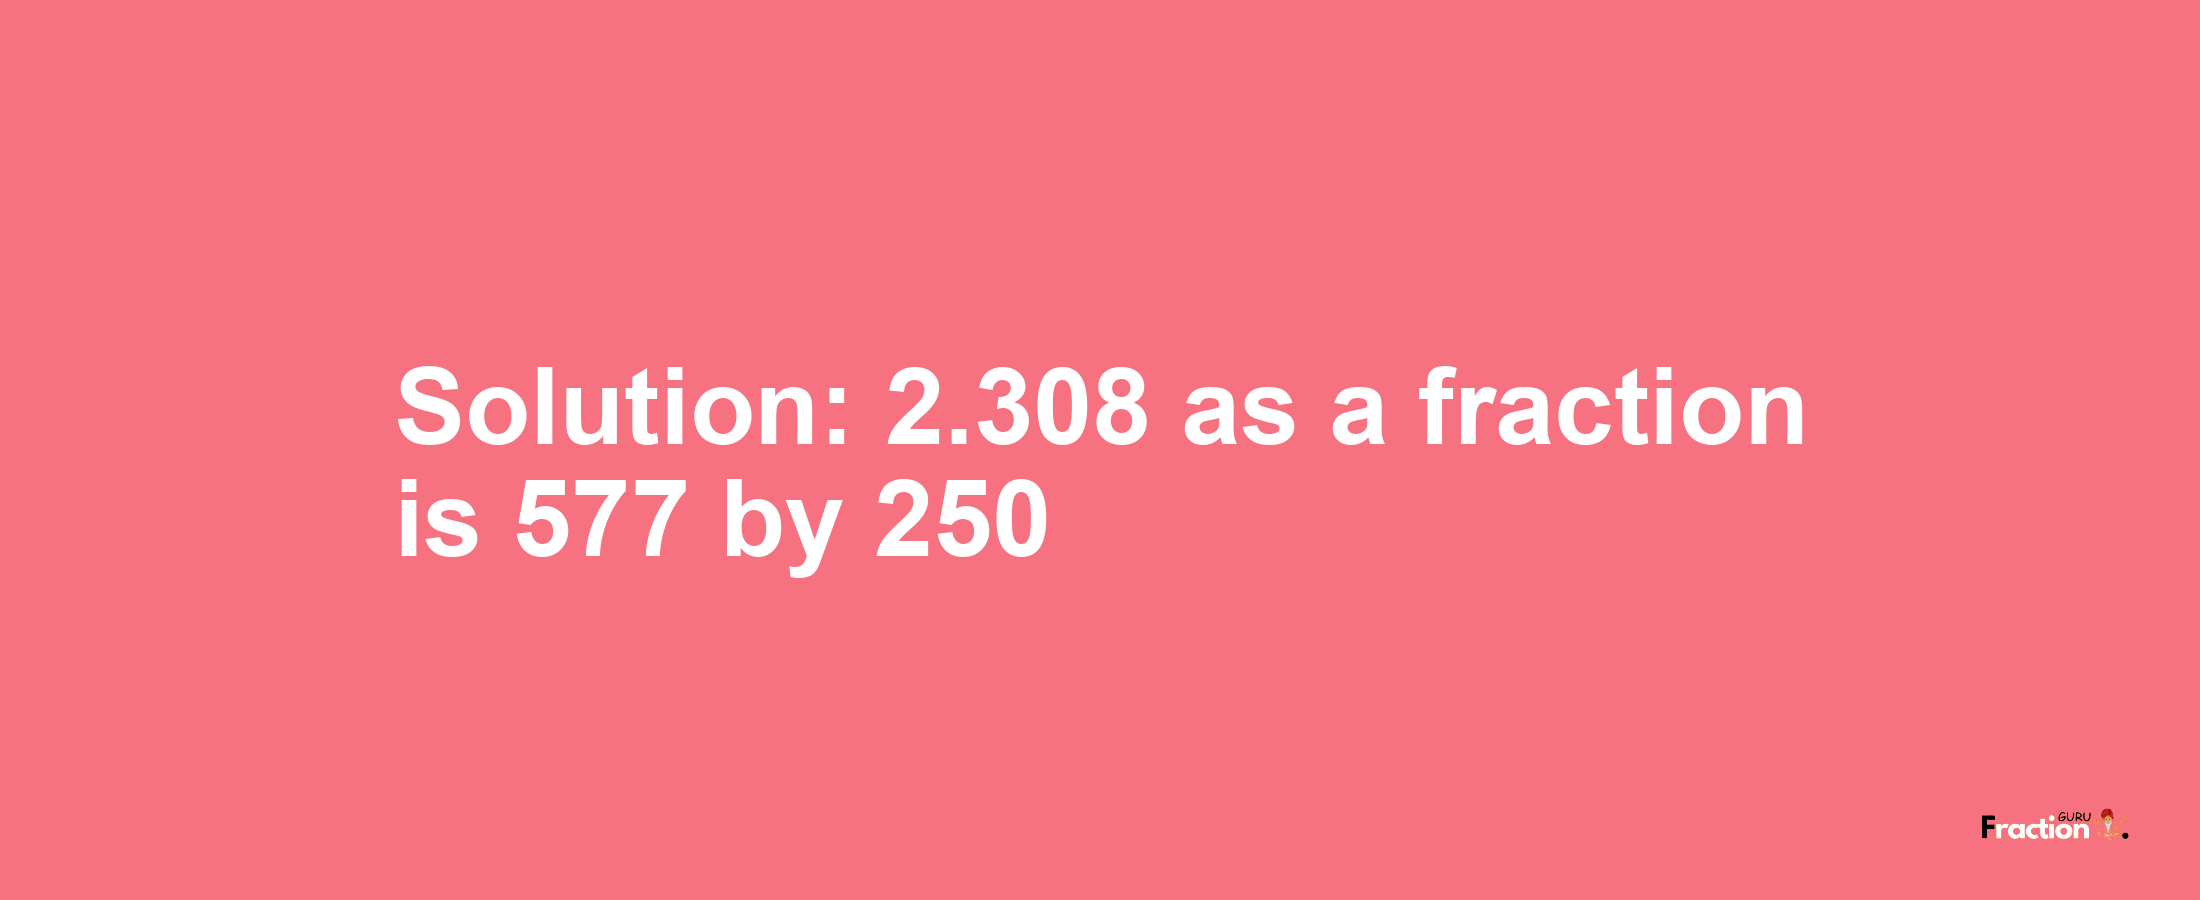 Solution:2.308 as a fraction is 577/250